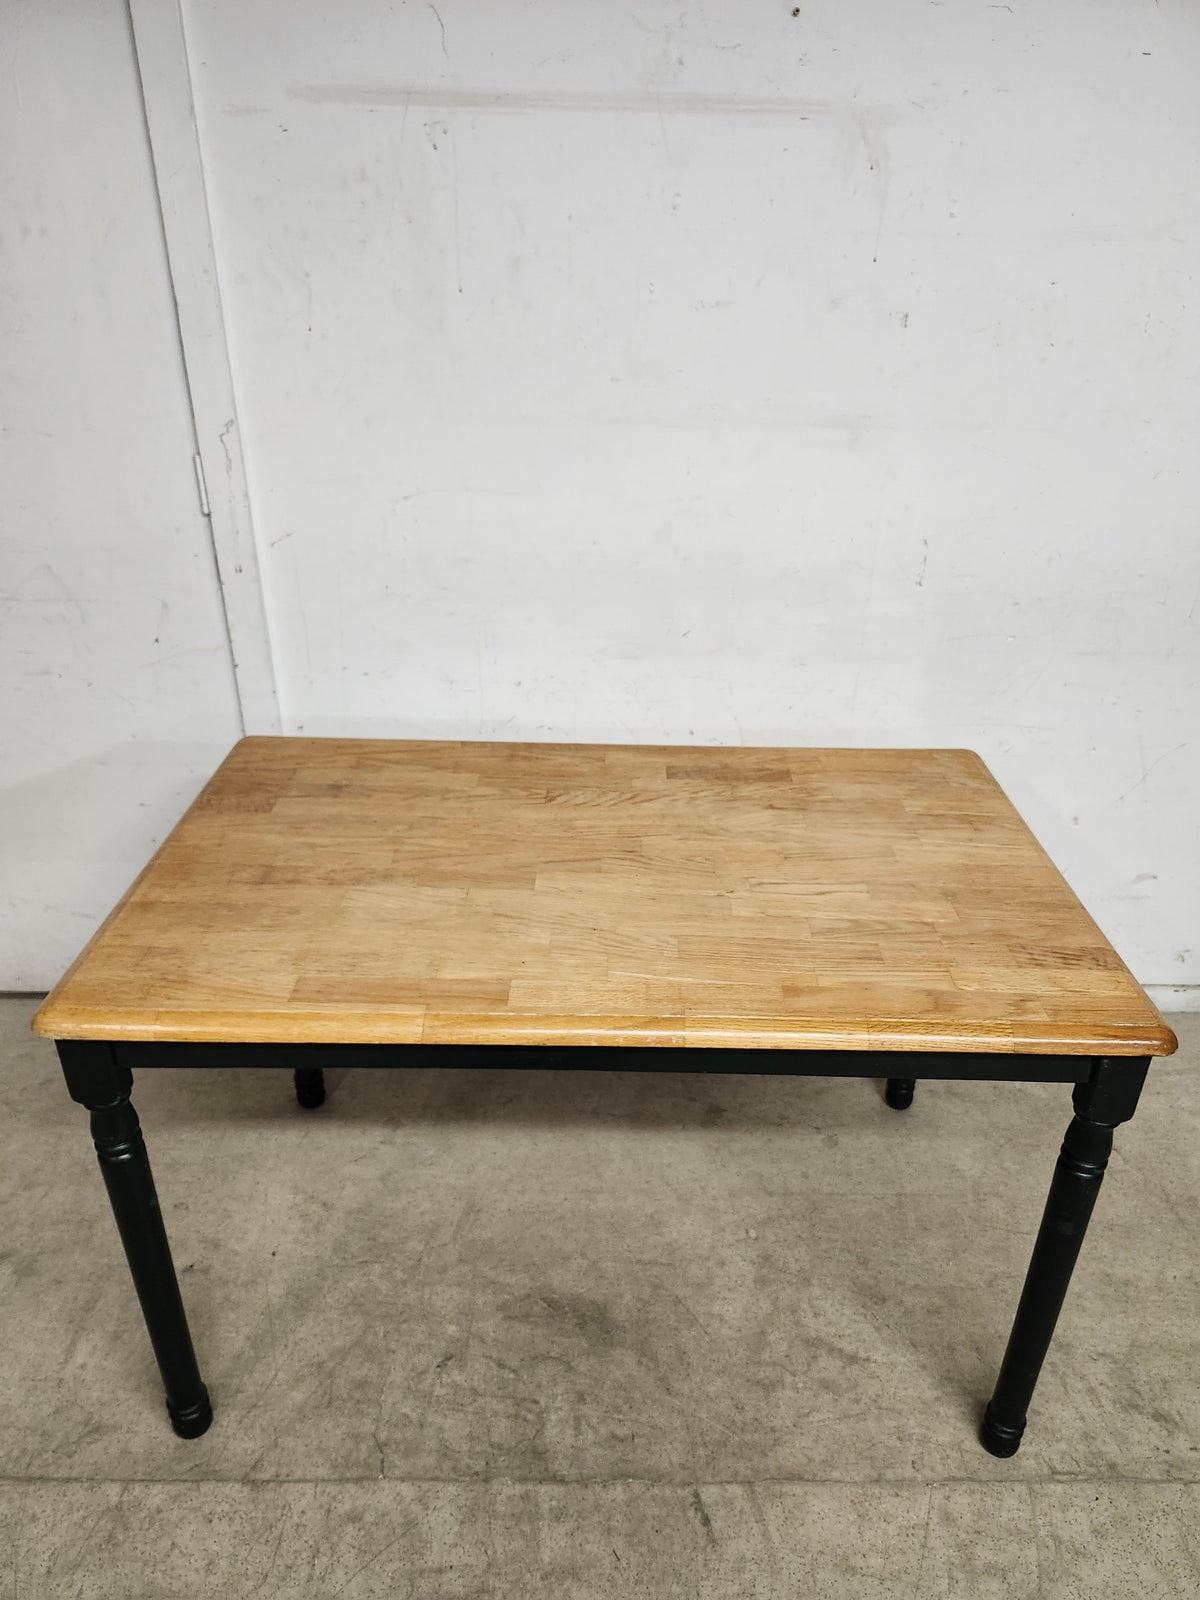 48" Solid Wood Kitchen Dining Table